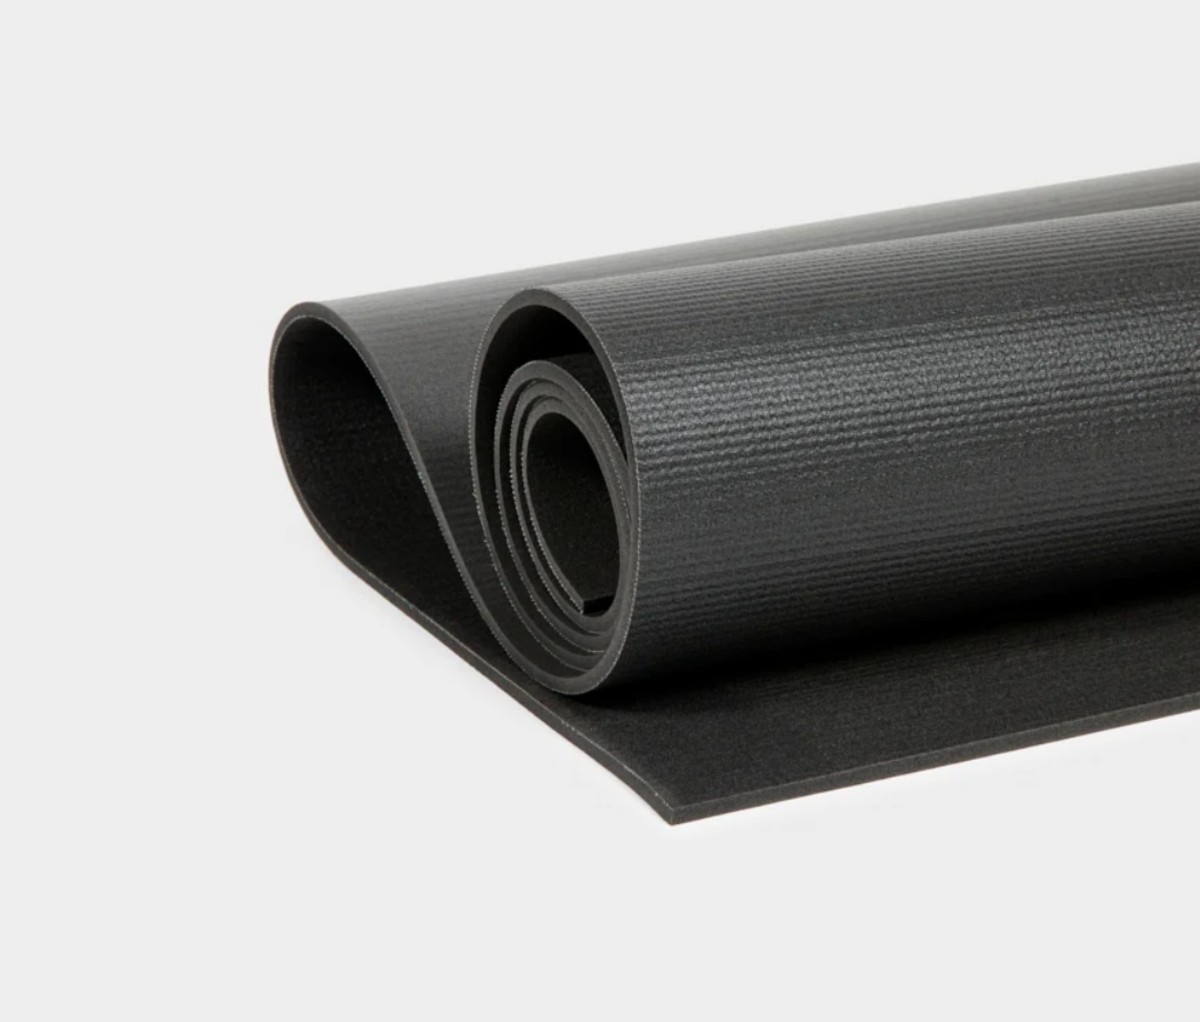 The Best Yoga Mats For Men: The Top 18 Options To Buy in 2022